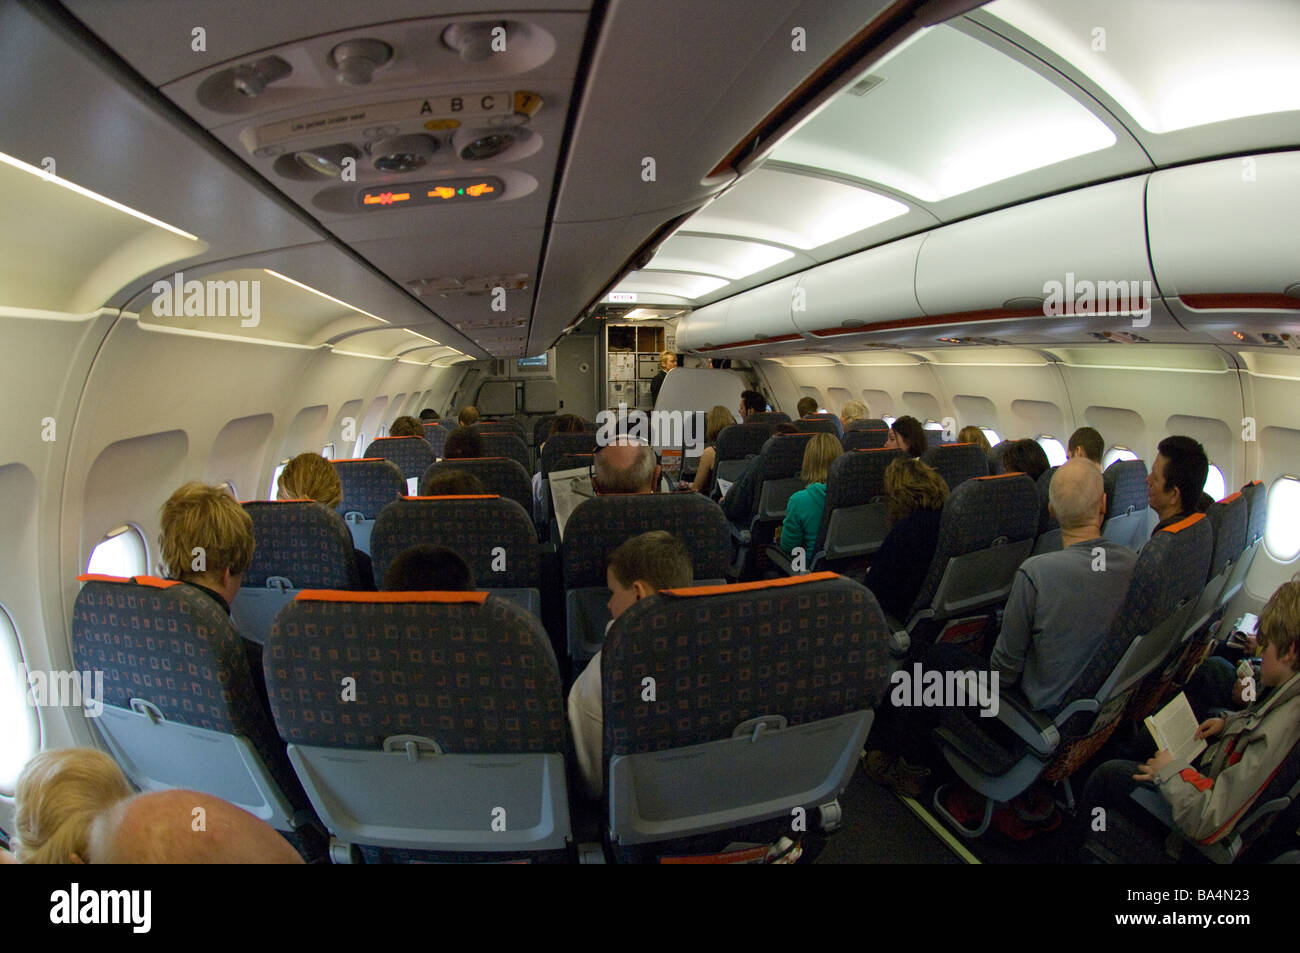 Interior Of Easyjet Airbus A319 Waiting For Take Off Stock Photo